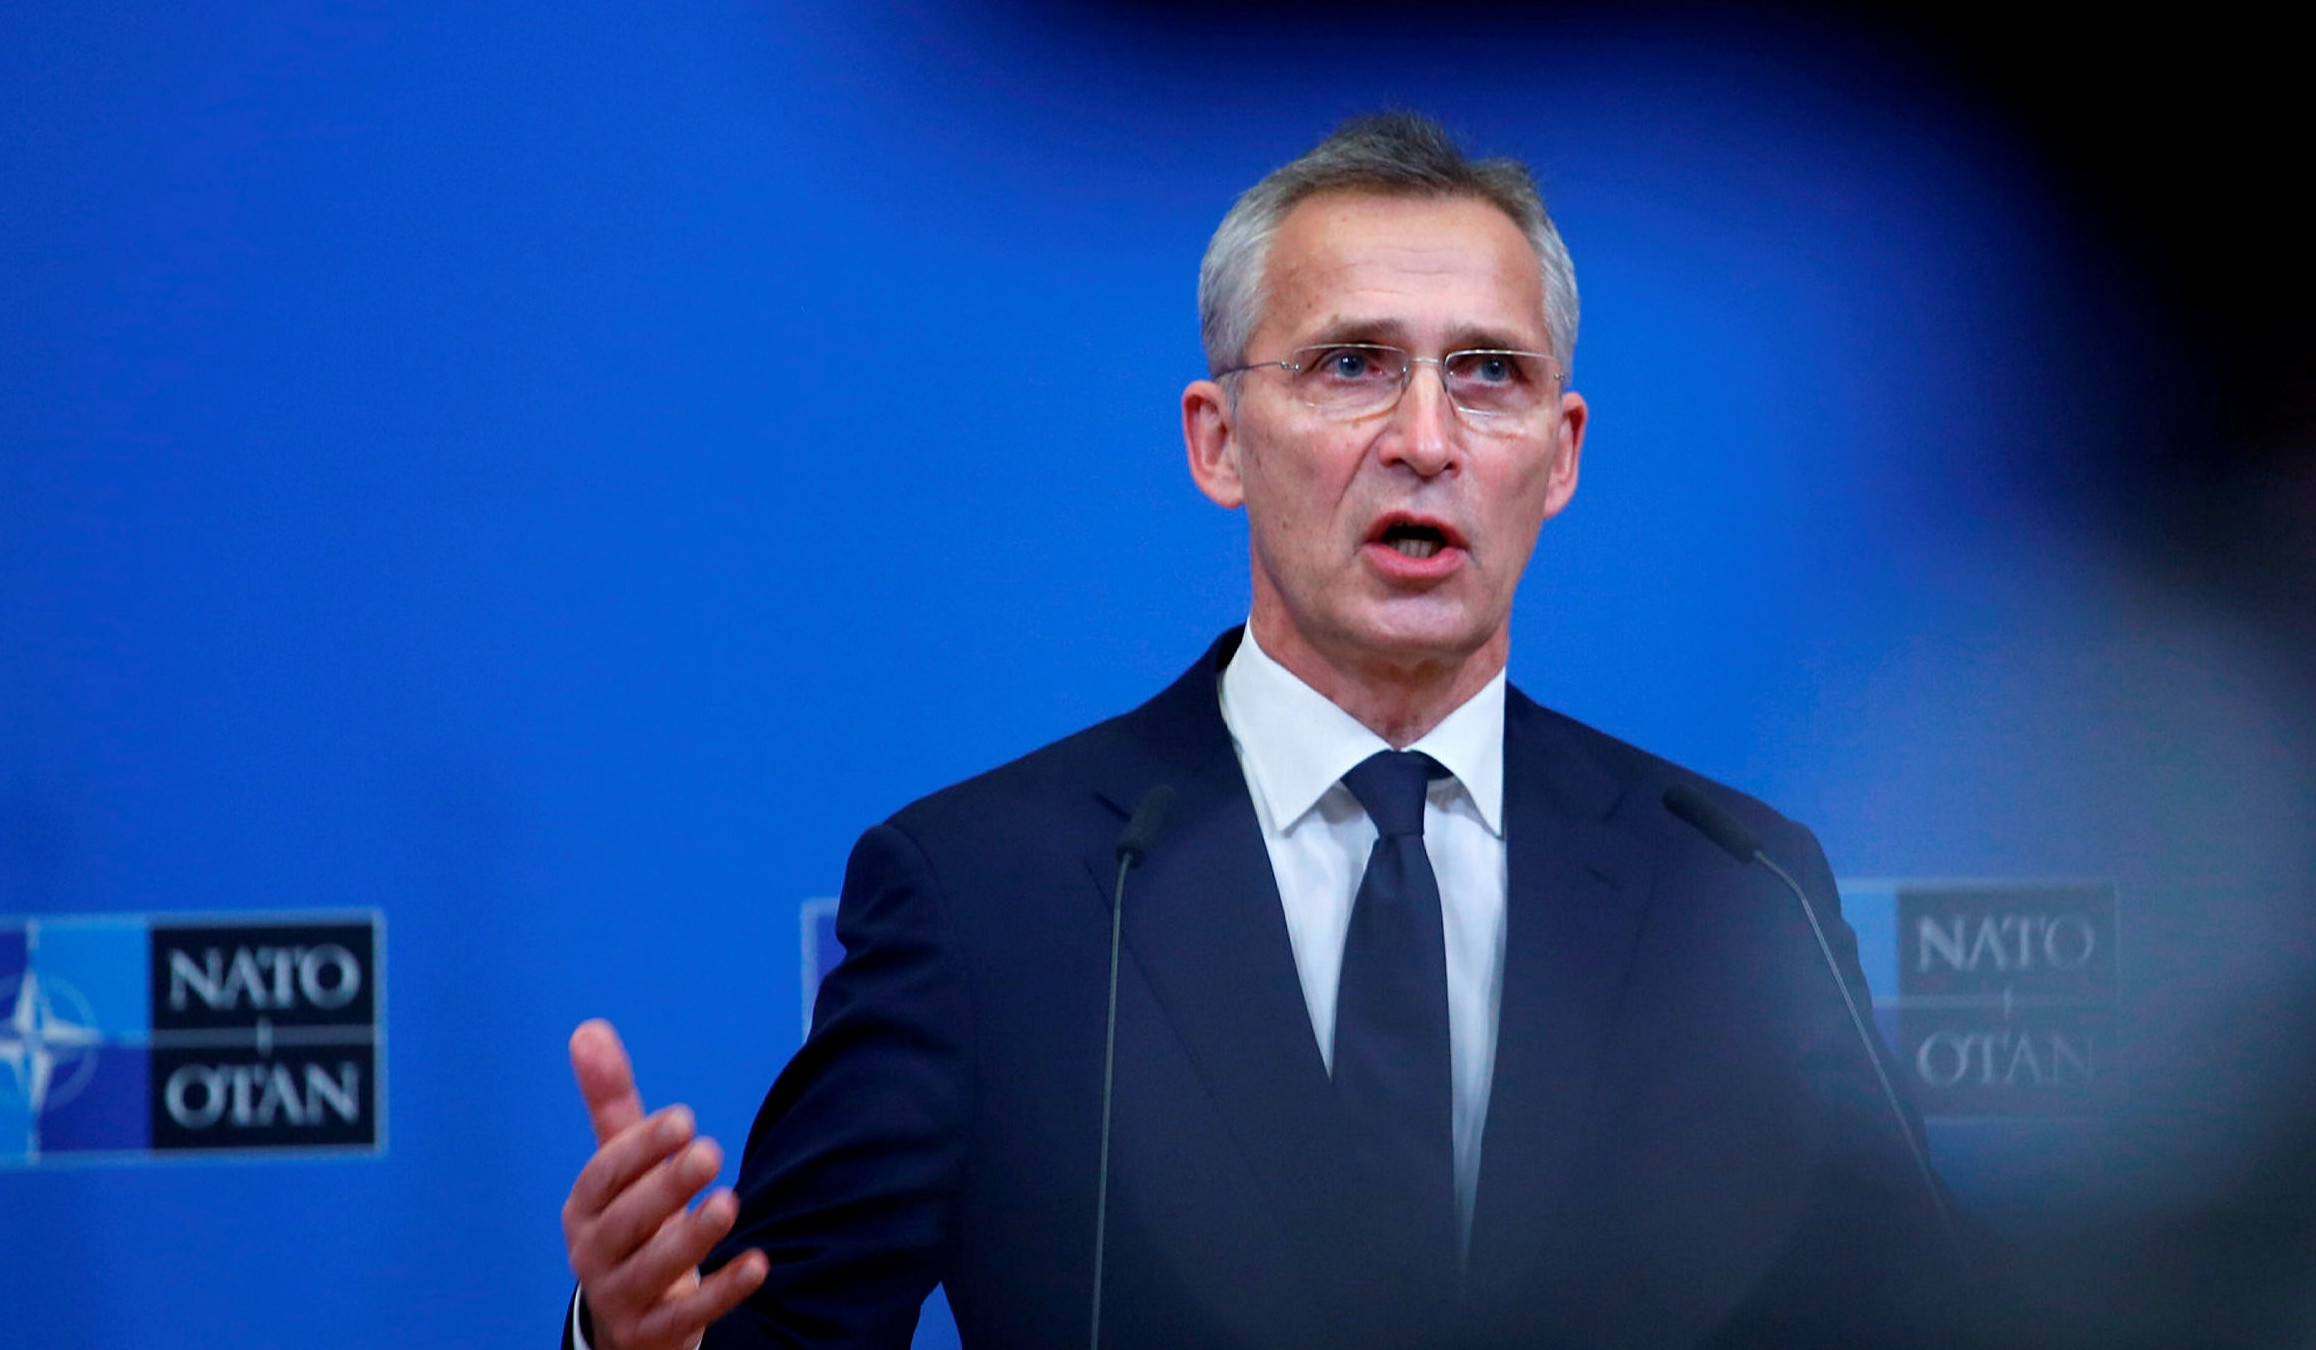 NATO will not send troops to Ukraine to prevent war with Russia: Stoltenberg